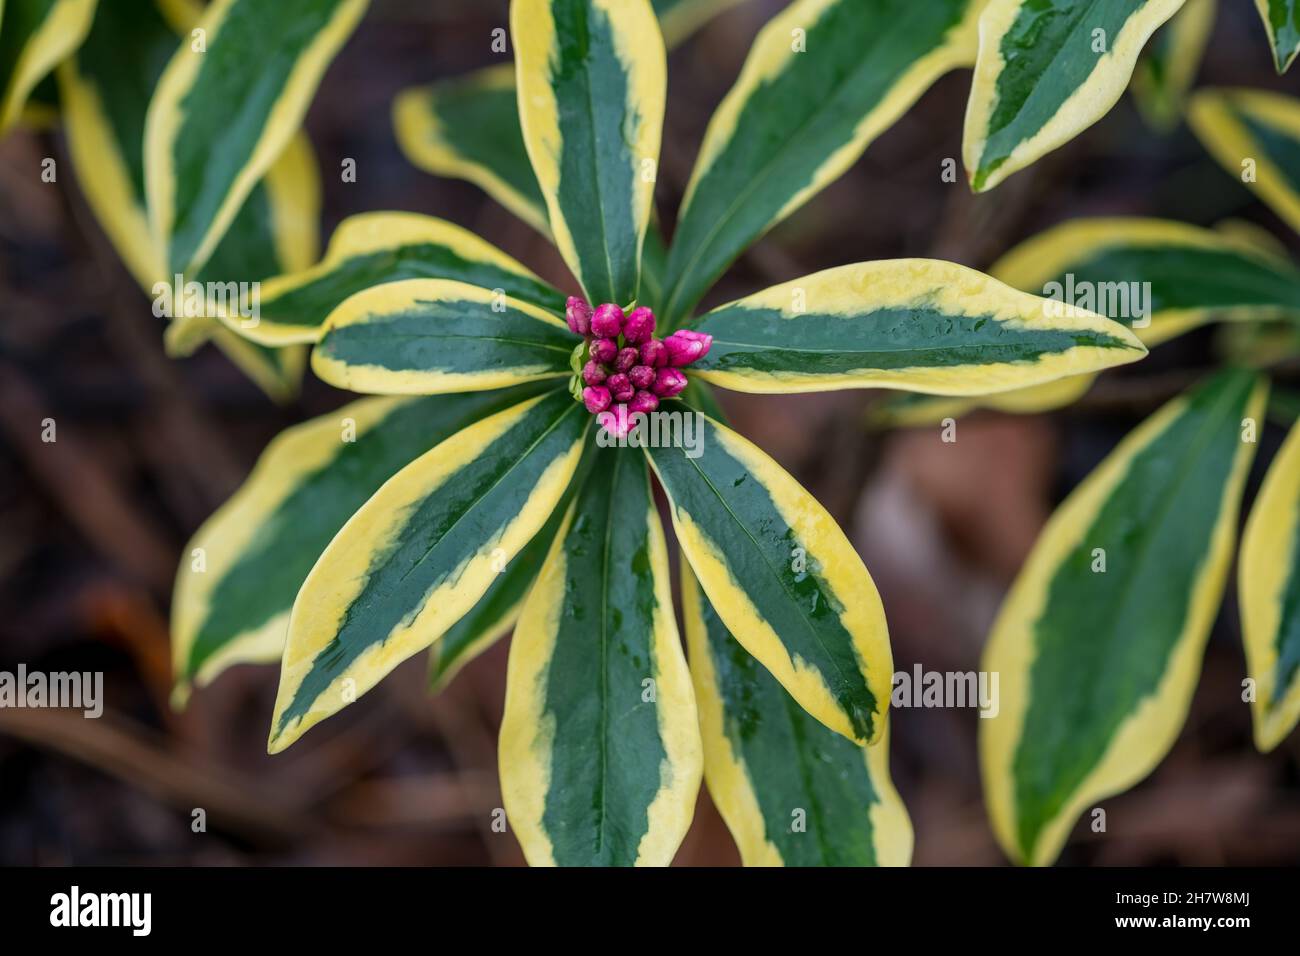 Winter daphne or Daphne odora 'Marianni' plant with its pink flowers and gorgeous, glossy, golden-edged, dark-green leaves. Closeup, Selective focus Stock Photo